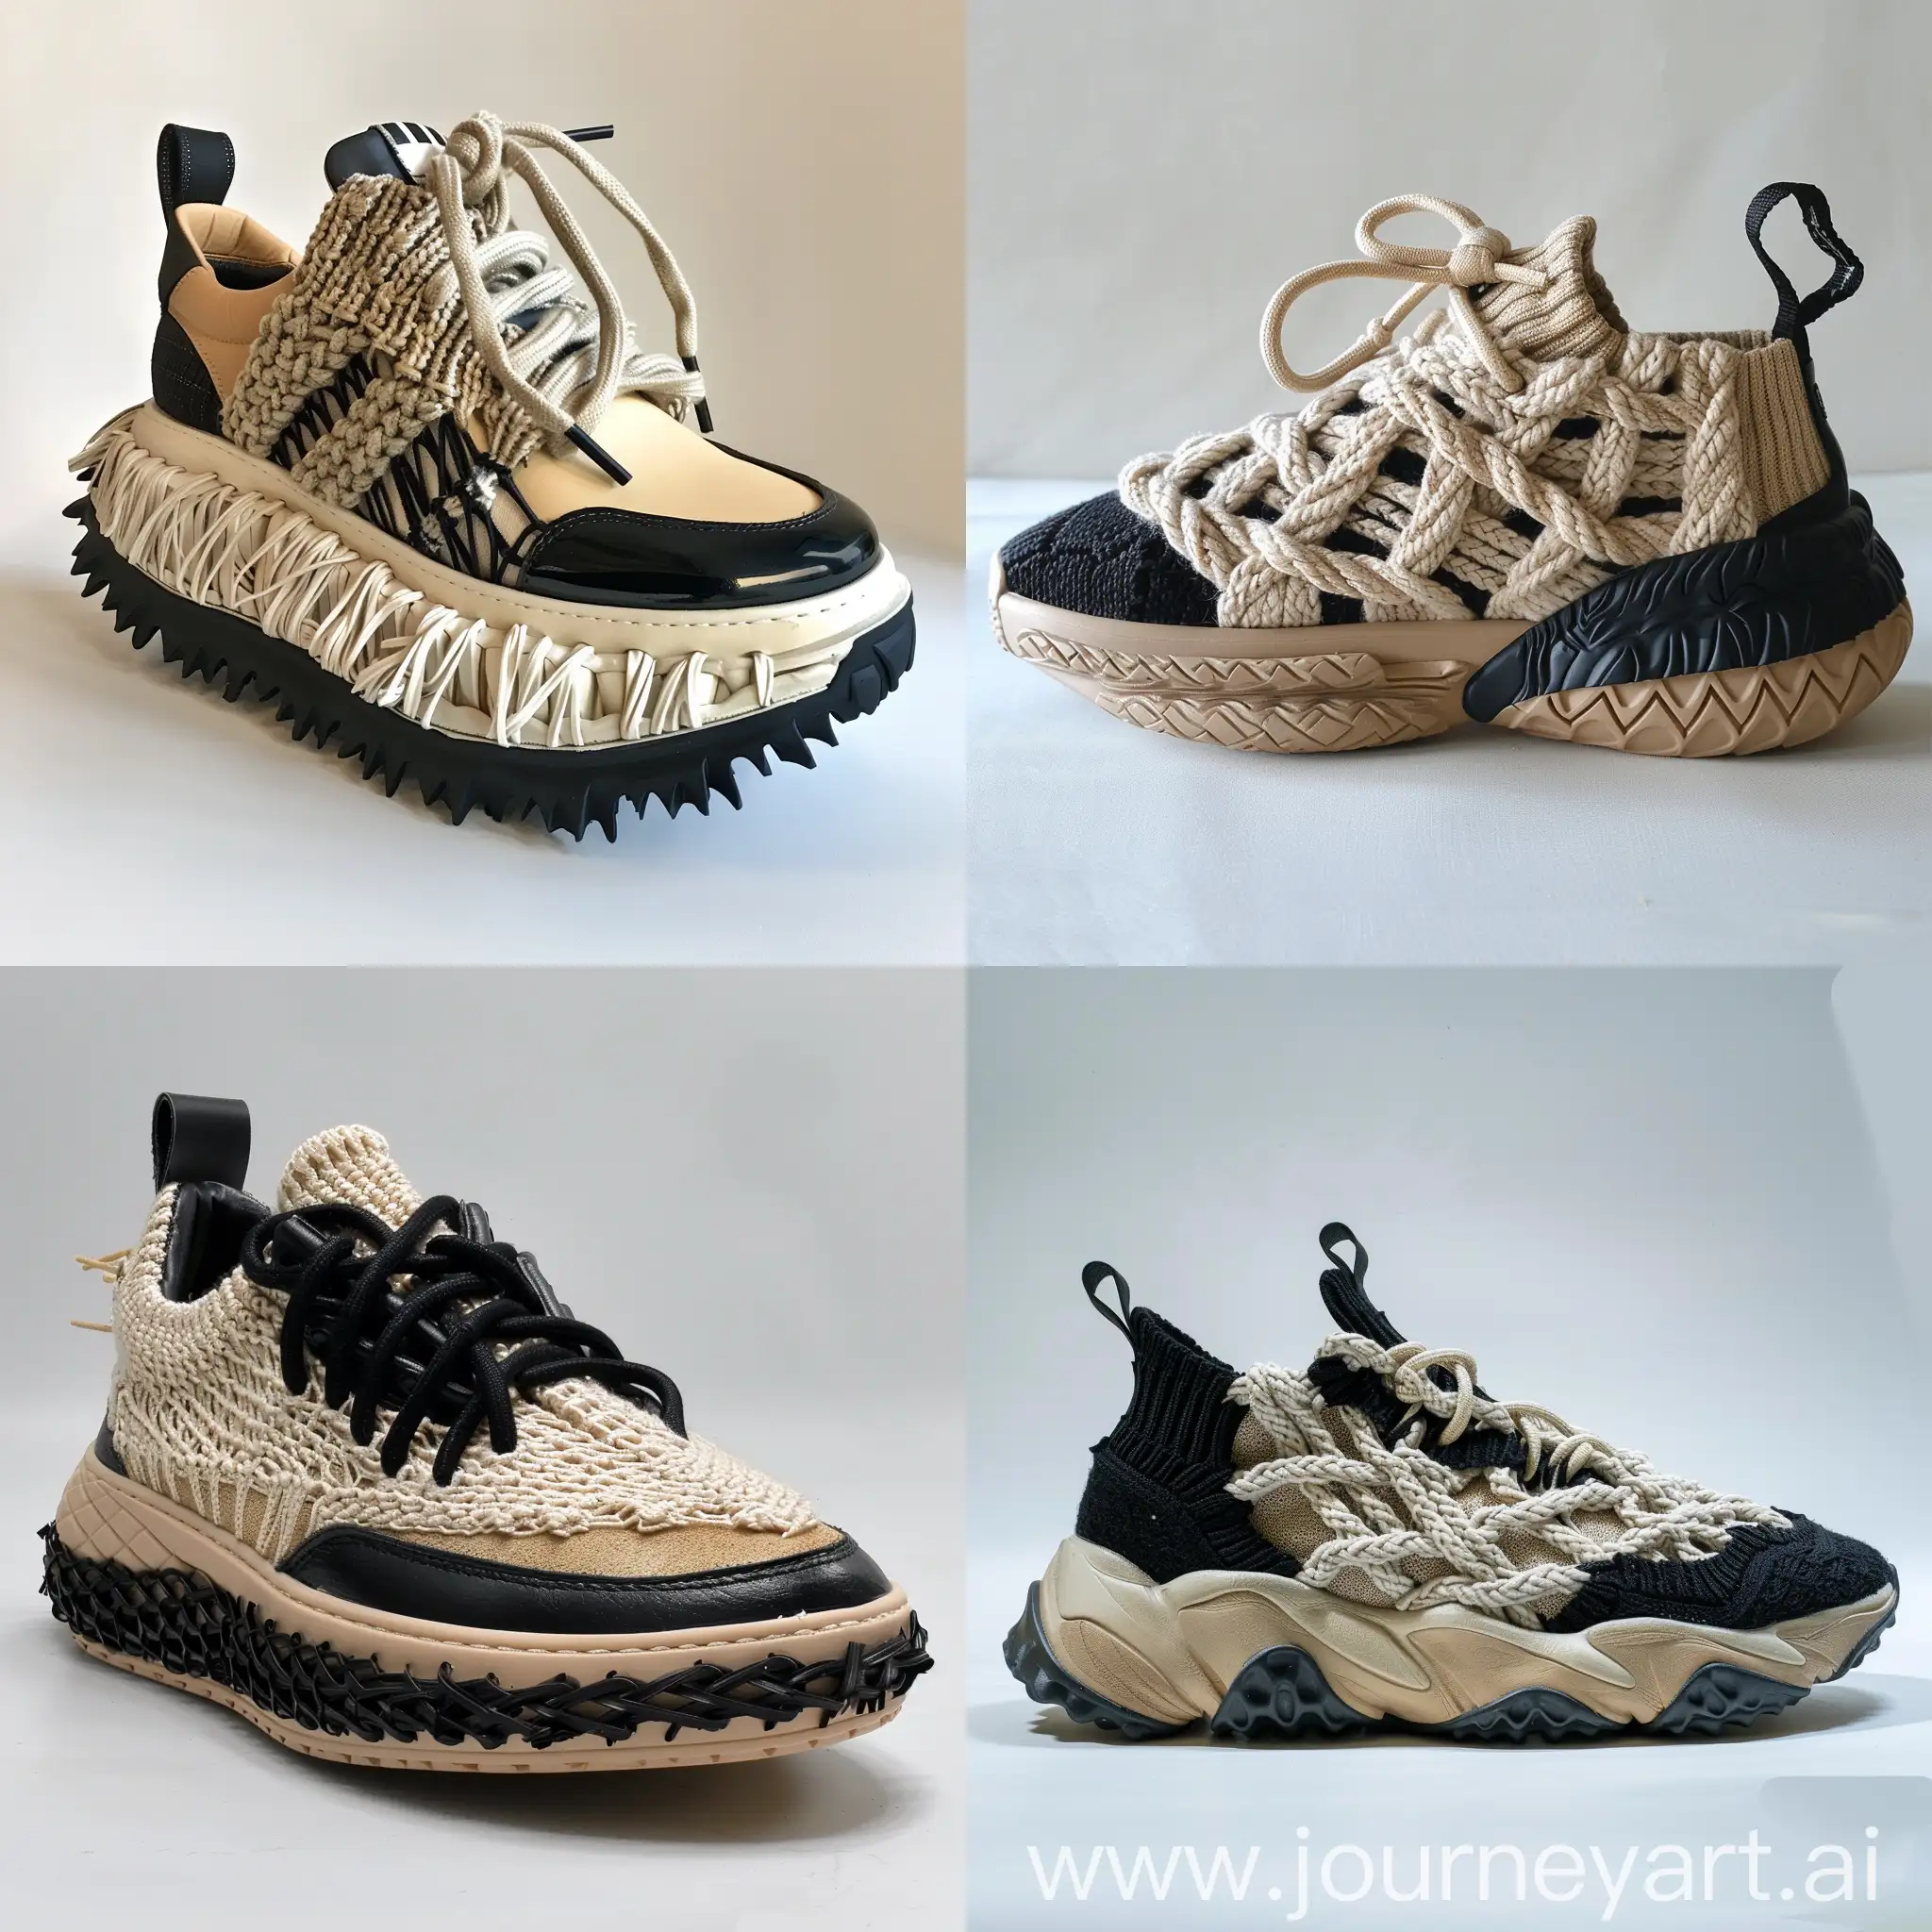 Chunky-Black-and-Light-Beige-Sneakers-Inspired-by-Turtles